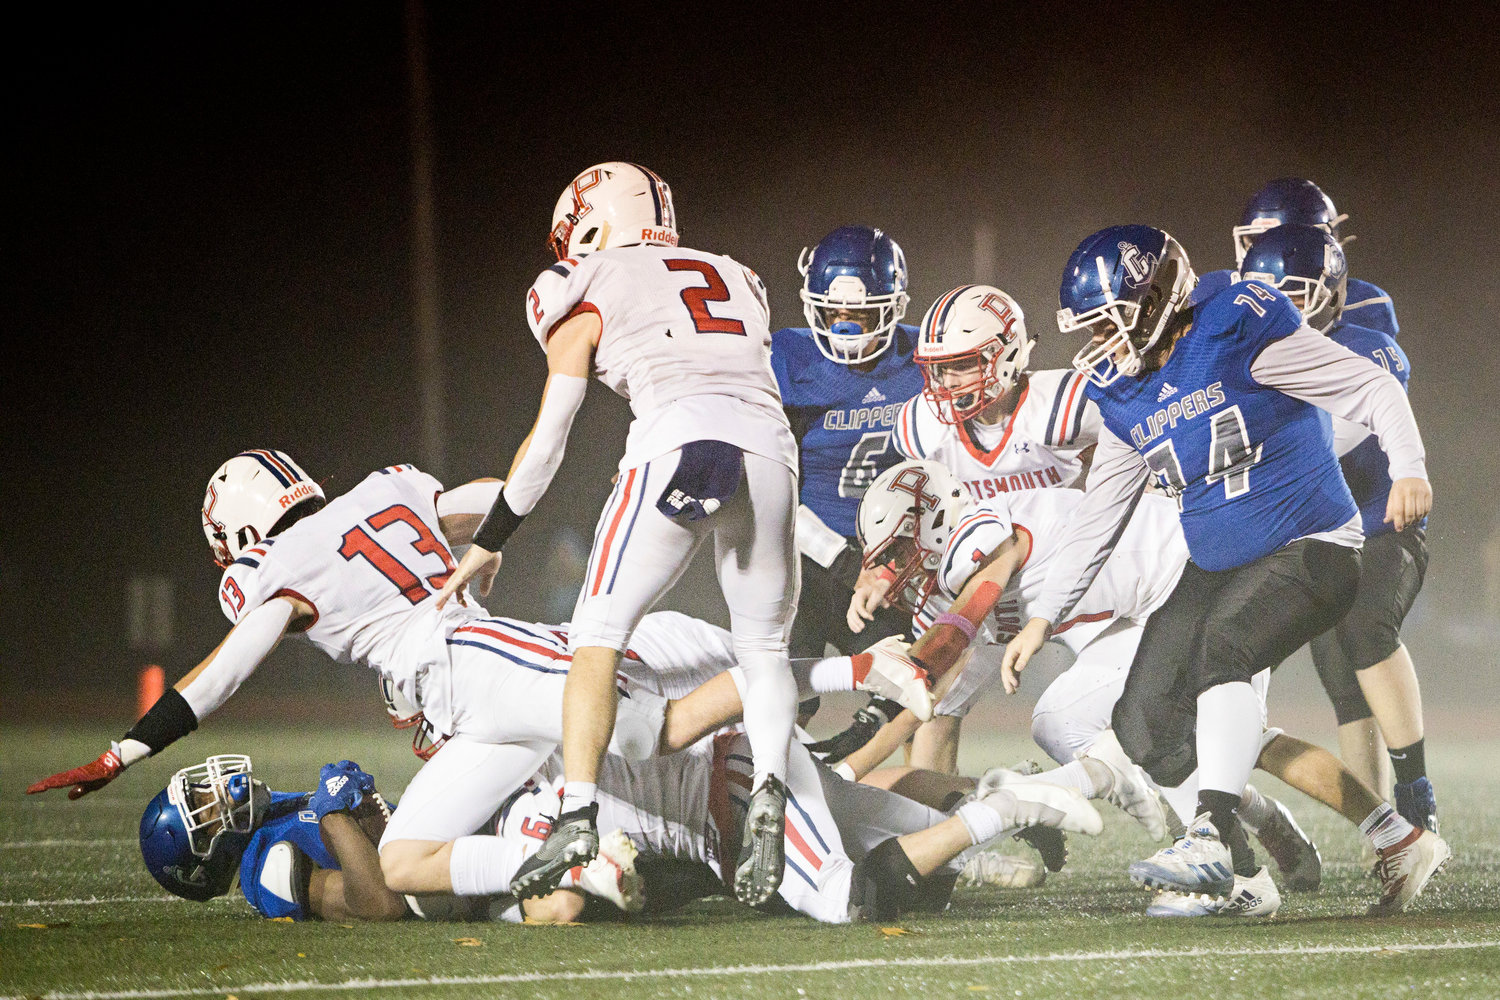 Marcus Evans (6) and Evan Beese (13) tackle a Cumberland opponent near the 50-yard line.